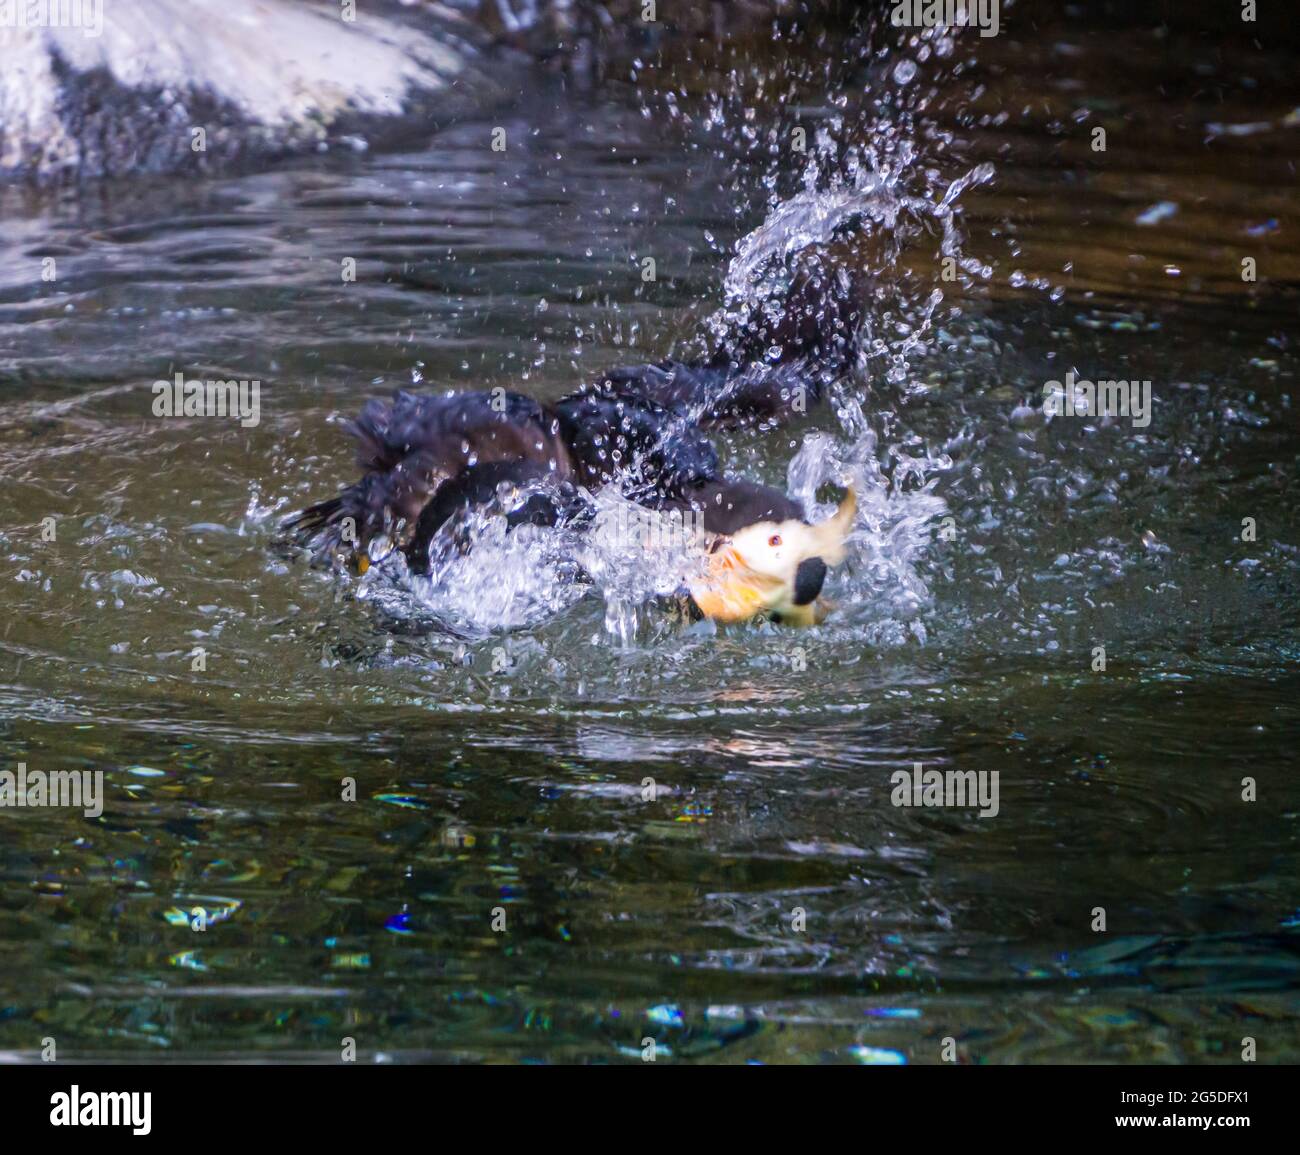 A Puffin bird splashed in a pool. Stock Photo